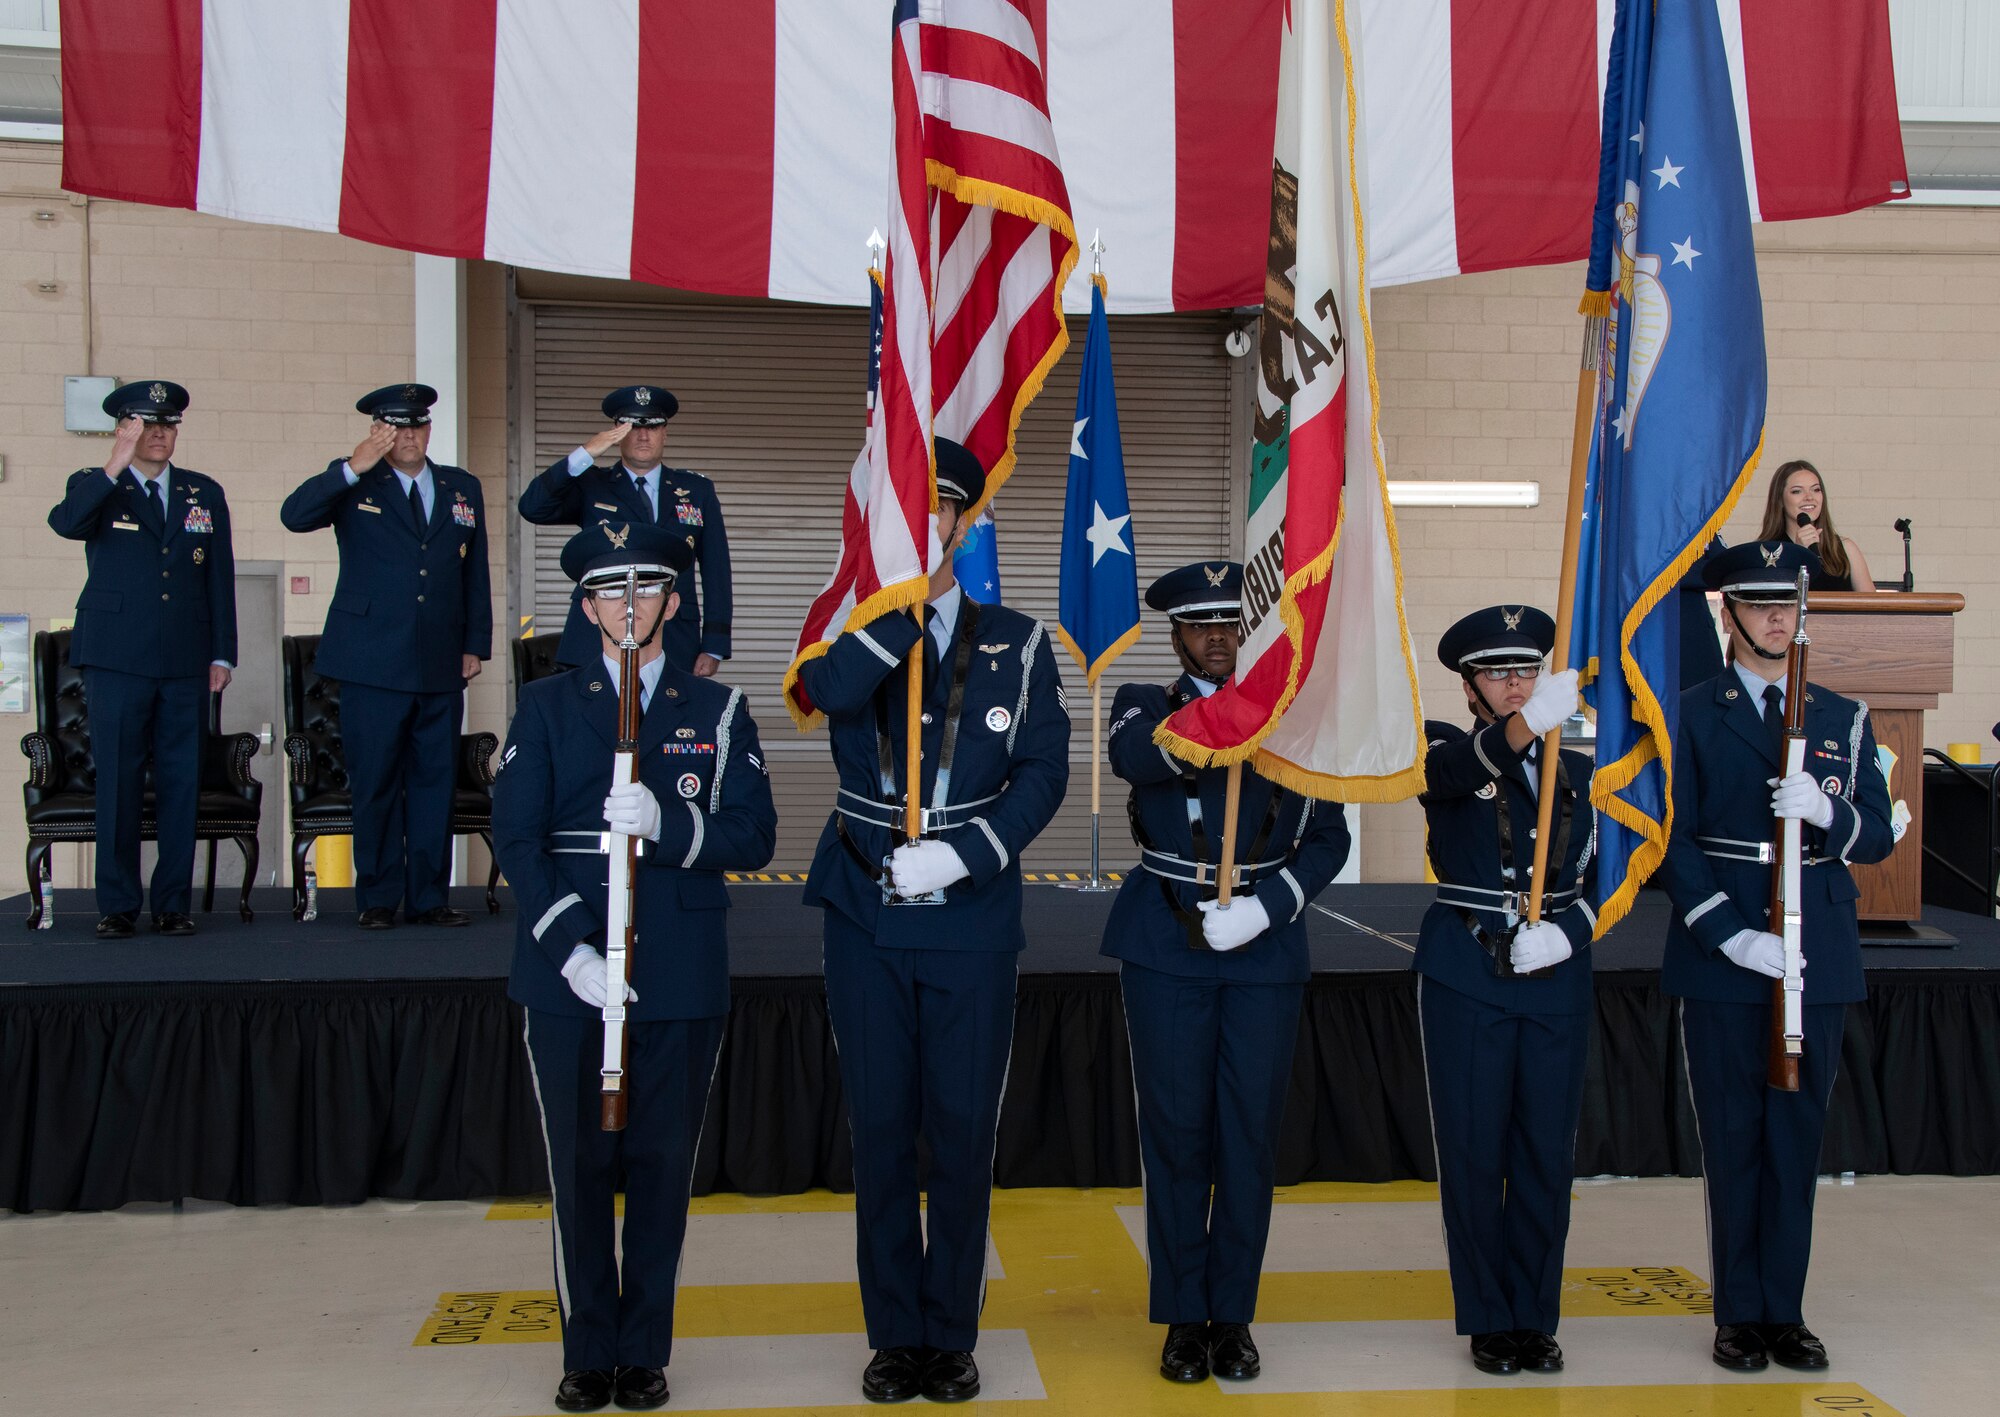 Airmen hold flags and other salutes.